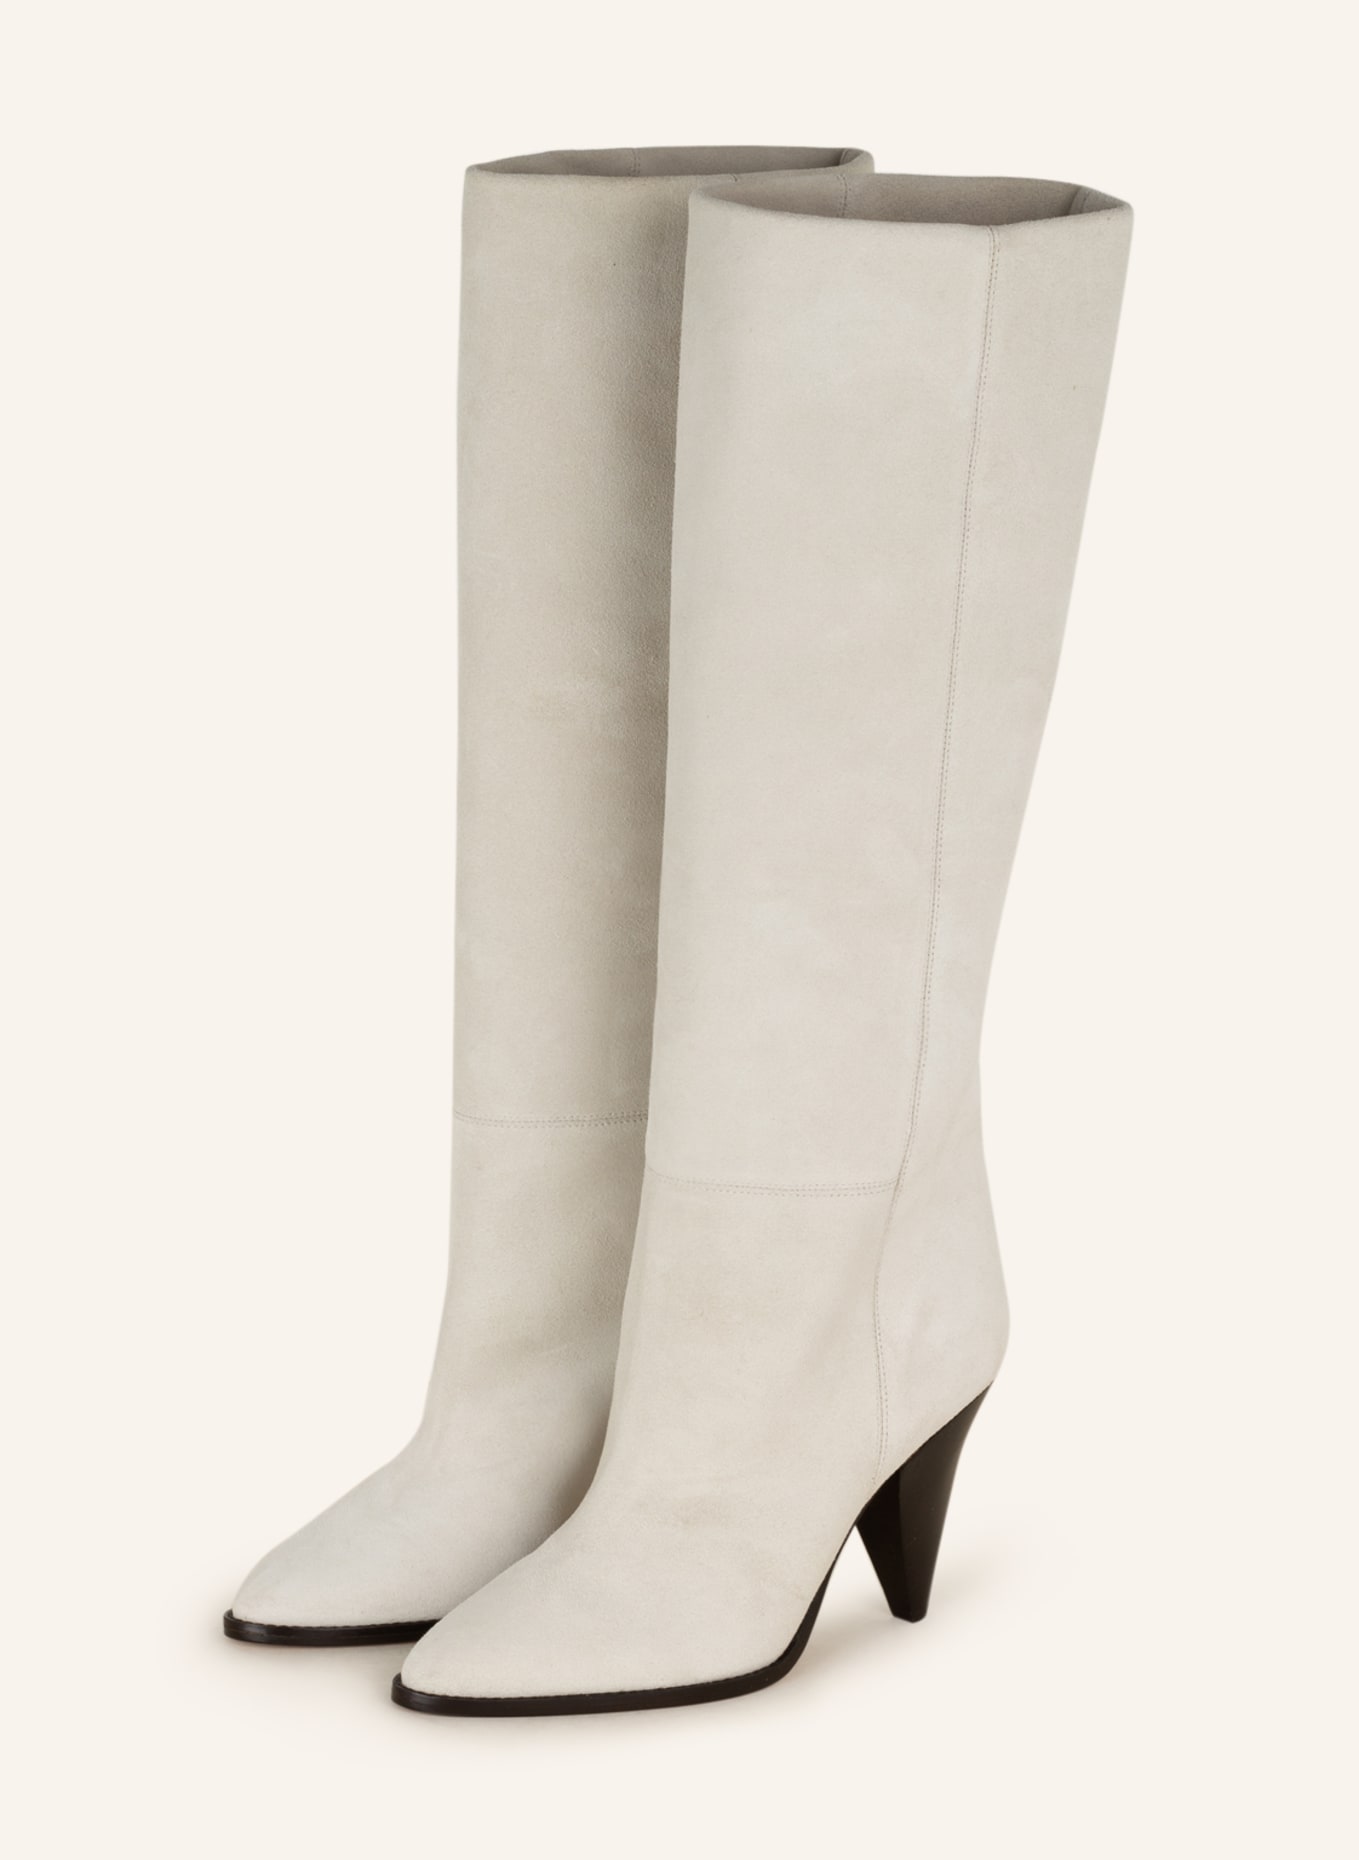 MARANT Boots SUEDE SLOUCHY in cream | Breuninger